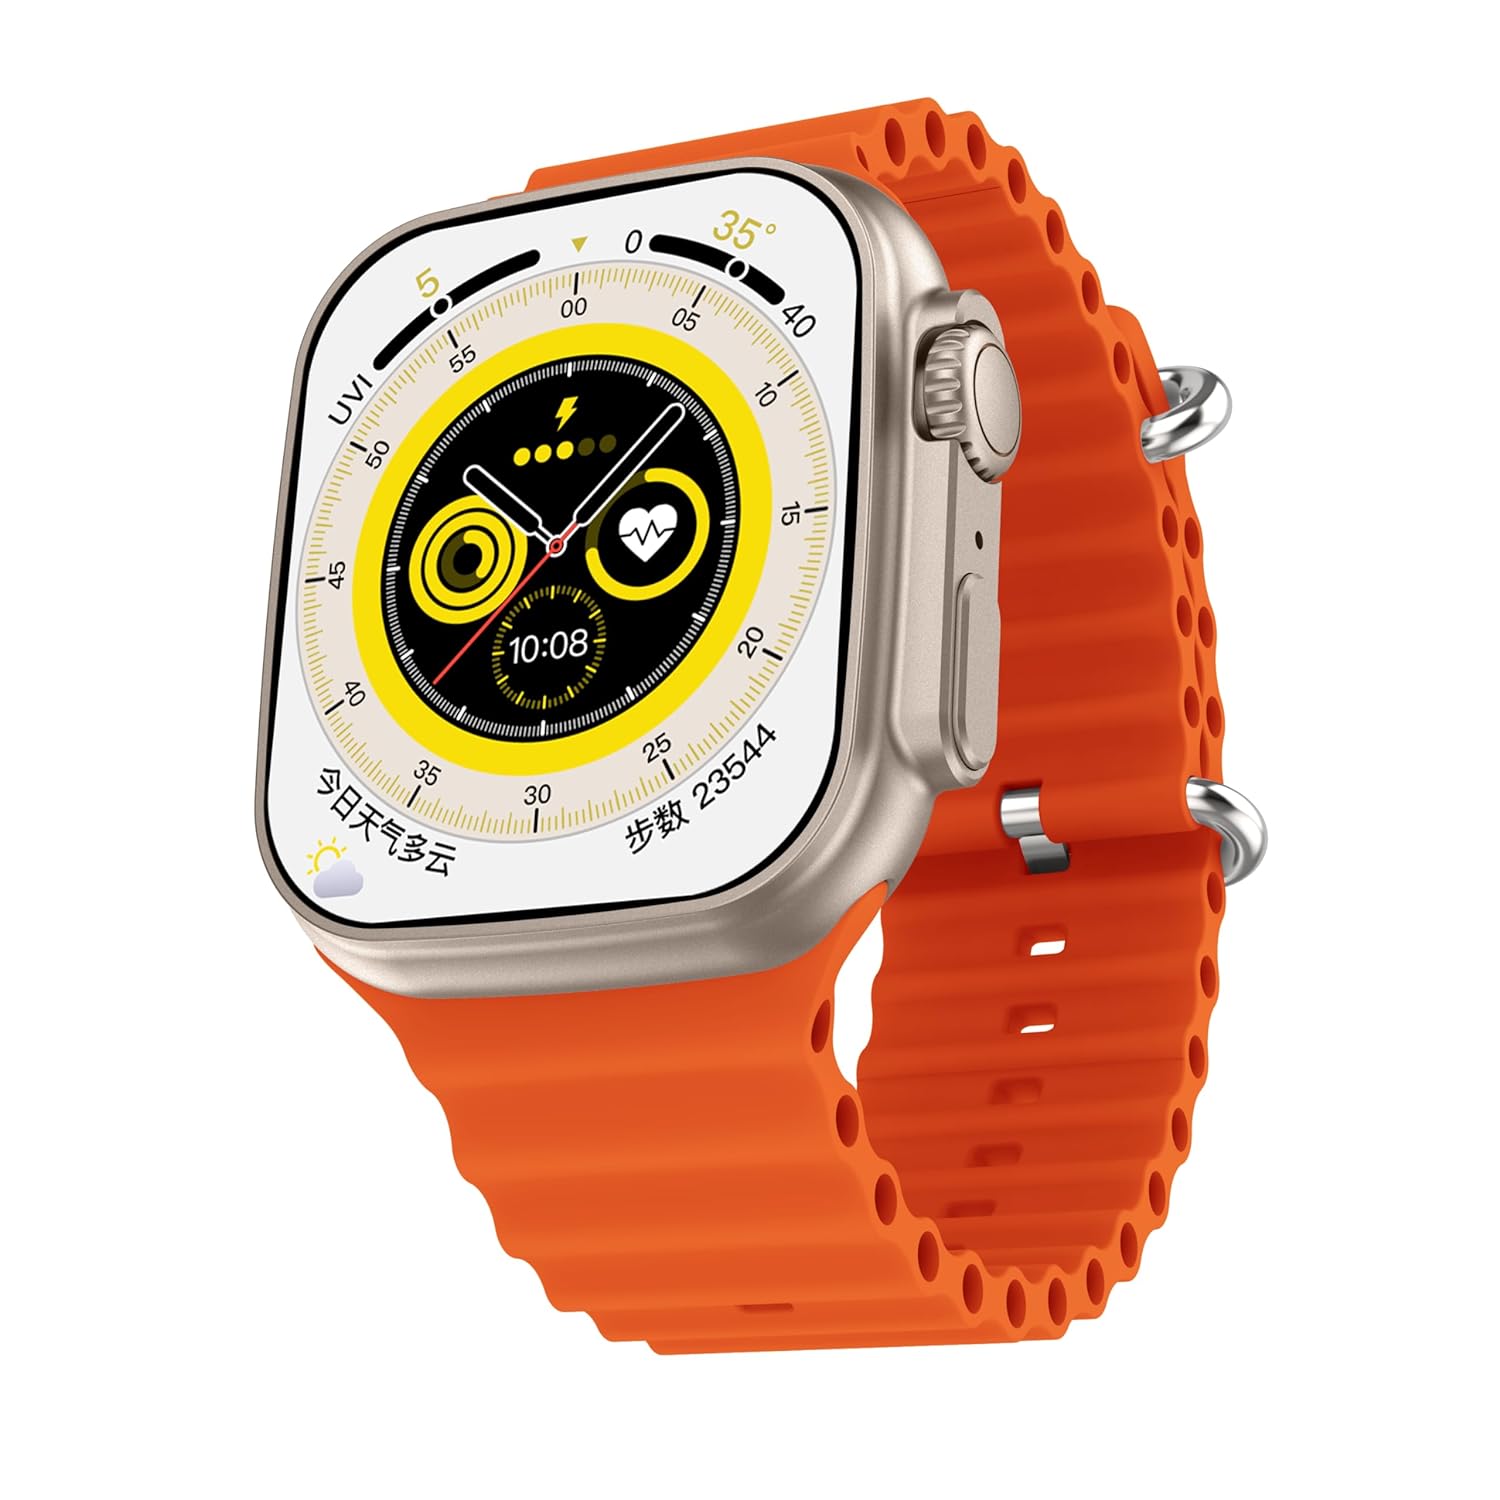 Fire-Boltt Gladiator 1.96" Biggest Display Smart Watch with Bluetooth Calling, Voice Assistant &123 Sports Modes, 8 Unique UI Interactions, SpO2, 24/7 Heart Rate Tracking (Orange)